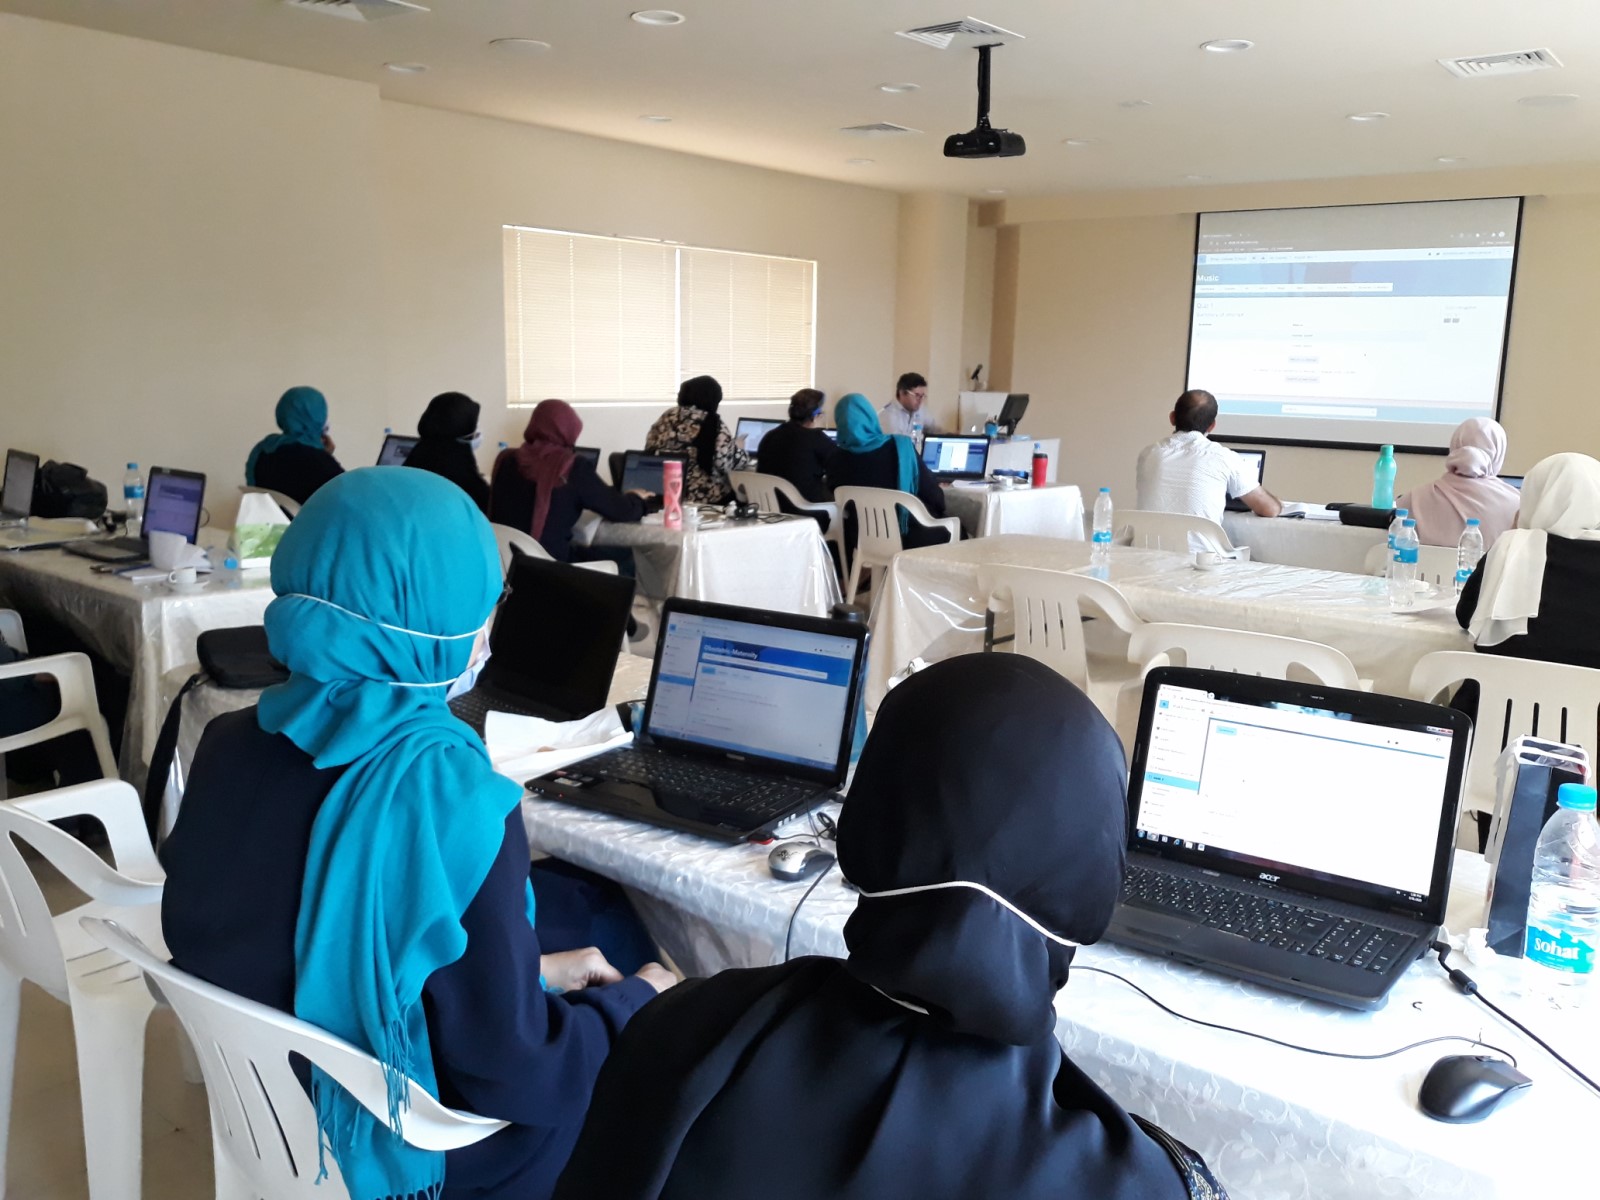 Learning Management System - Moodle Training for Teachers